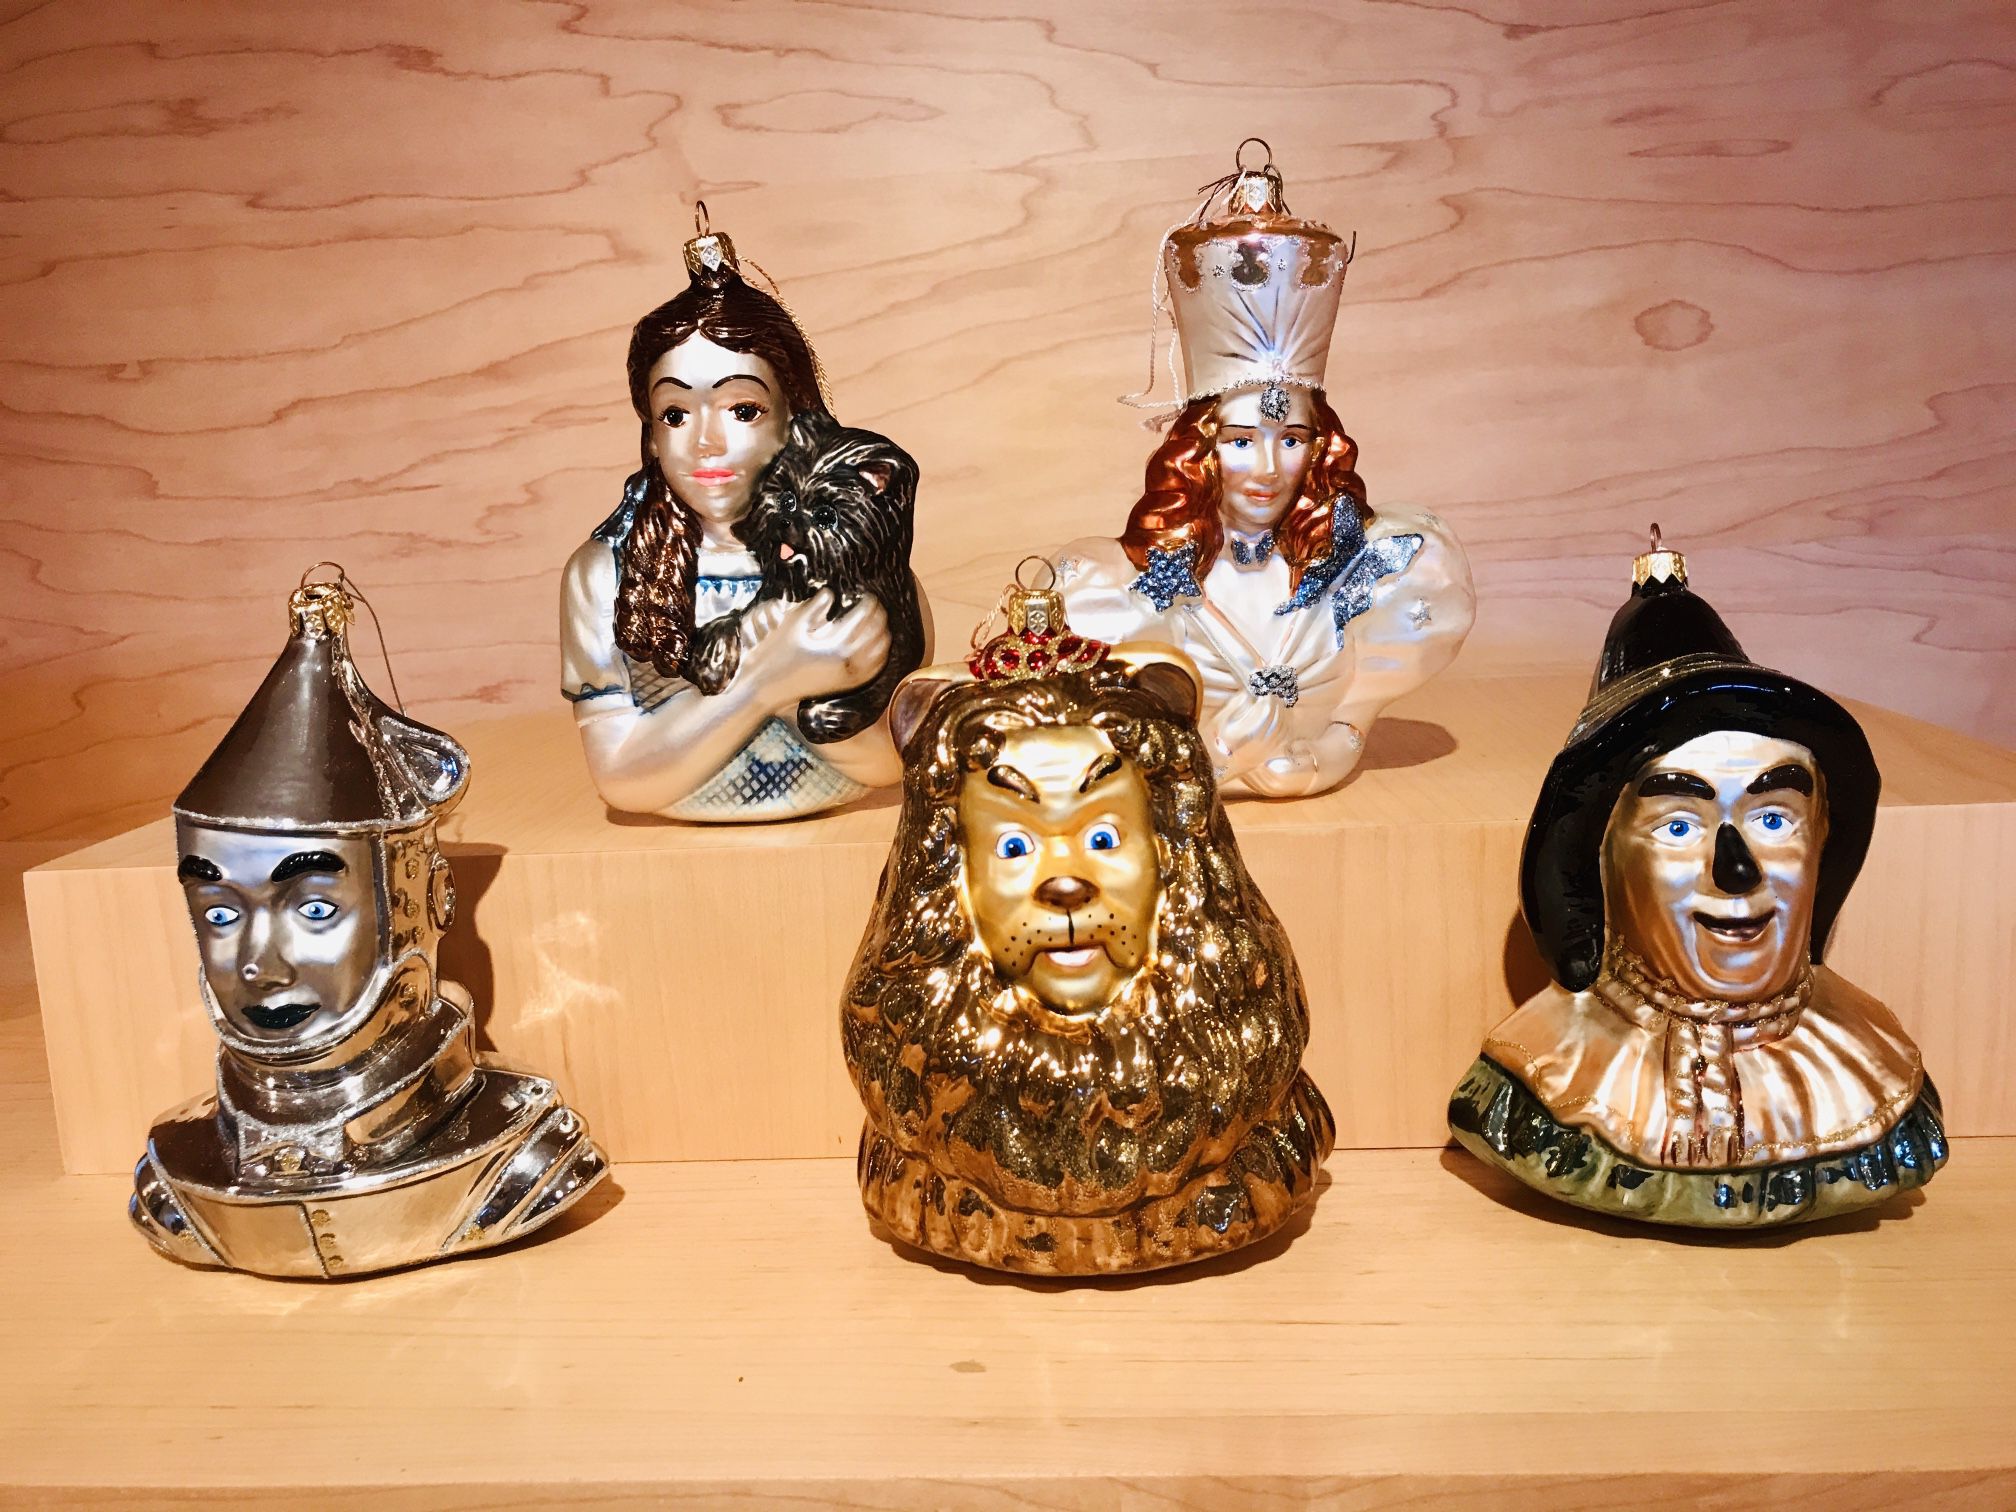 Wizard of Oz Christmas ornaments